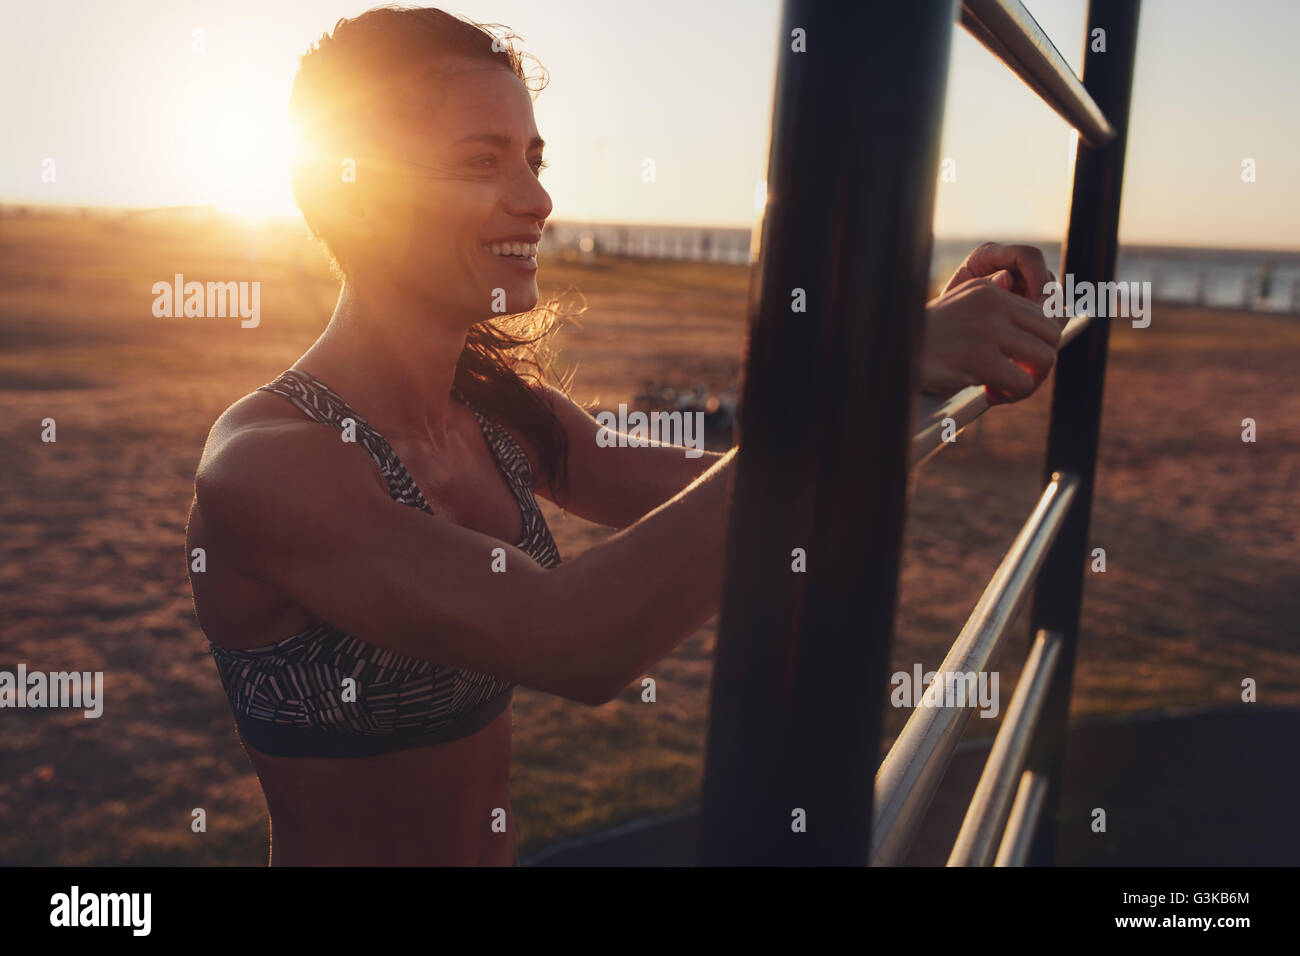 Happy young sportswoman working out on wall bars during sunset. fitness woman smiling and looking away at evening. Stock Photo